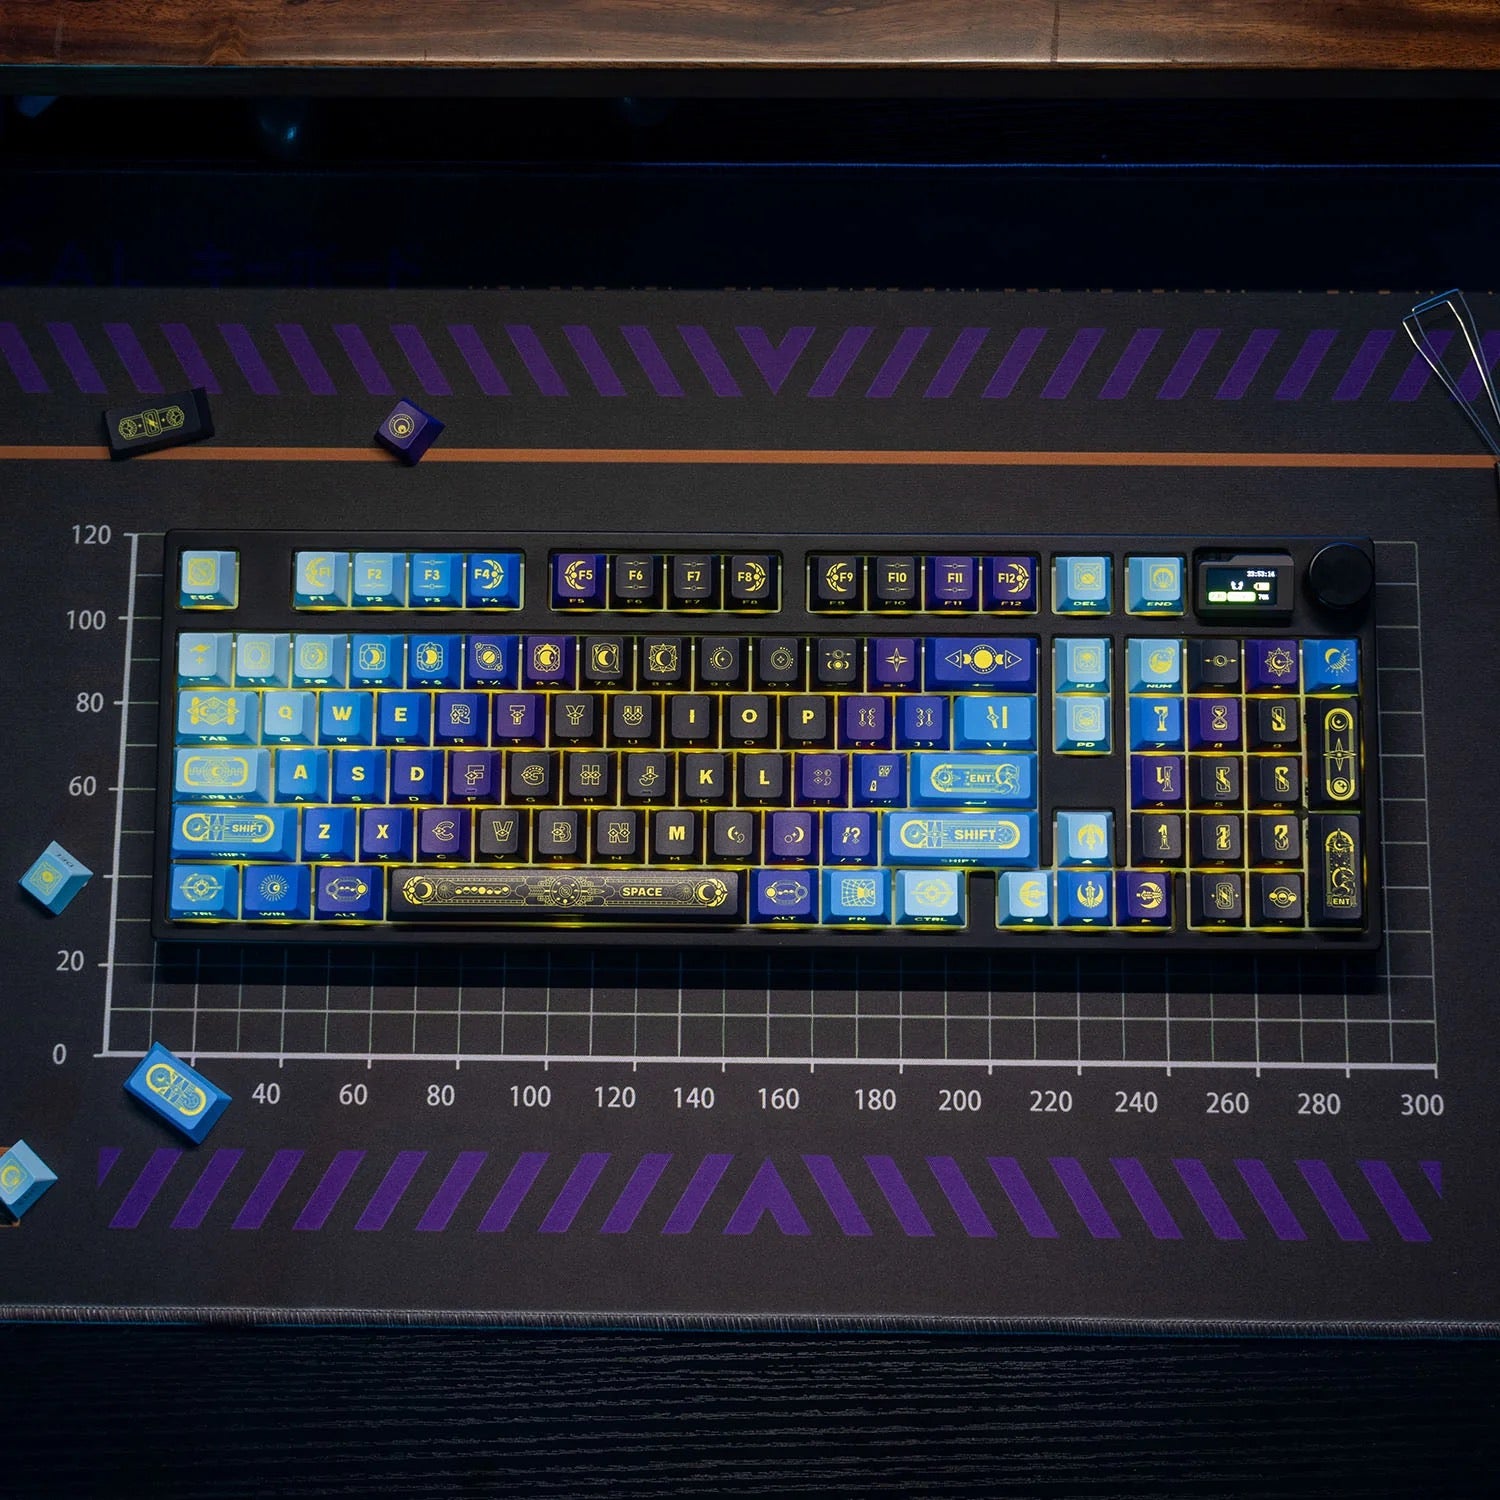 ChatGPT ChatGPT "What Would a Mirana-Themed Keycap Set Look Like?" - Explore the Mystique!